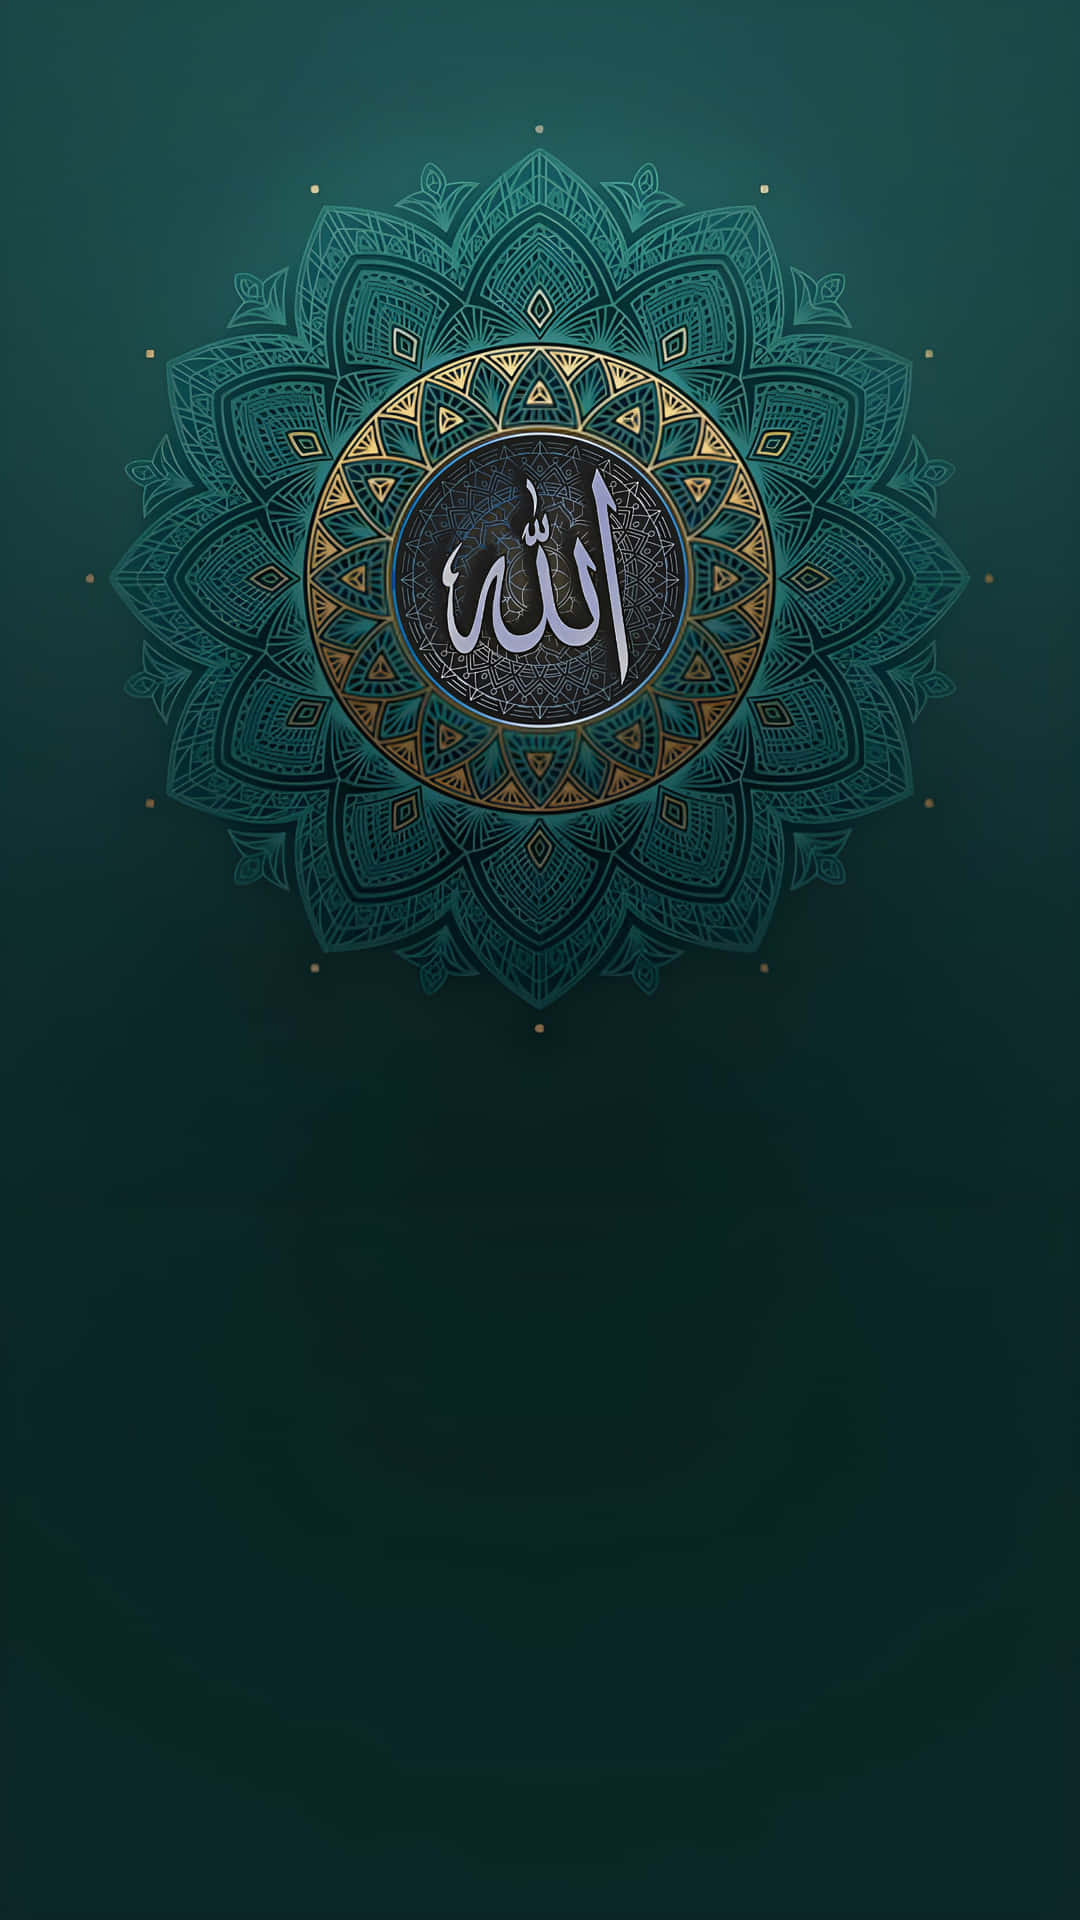 NEW Allah Name Dp In heart wallpaper Allah dp images Islamic dp hd  Mohommad Name 22  YouTube